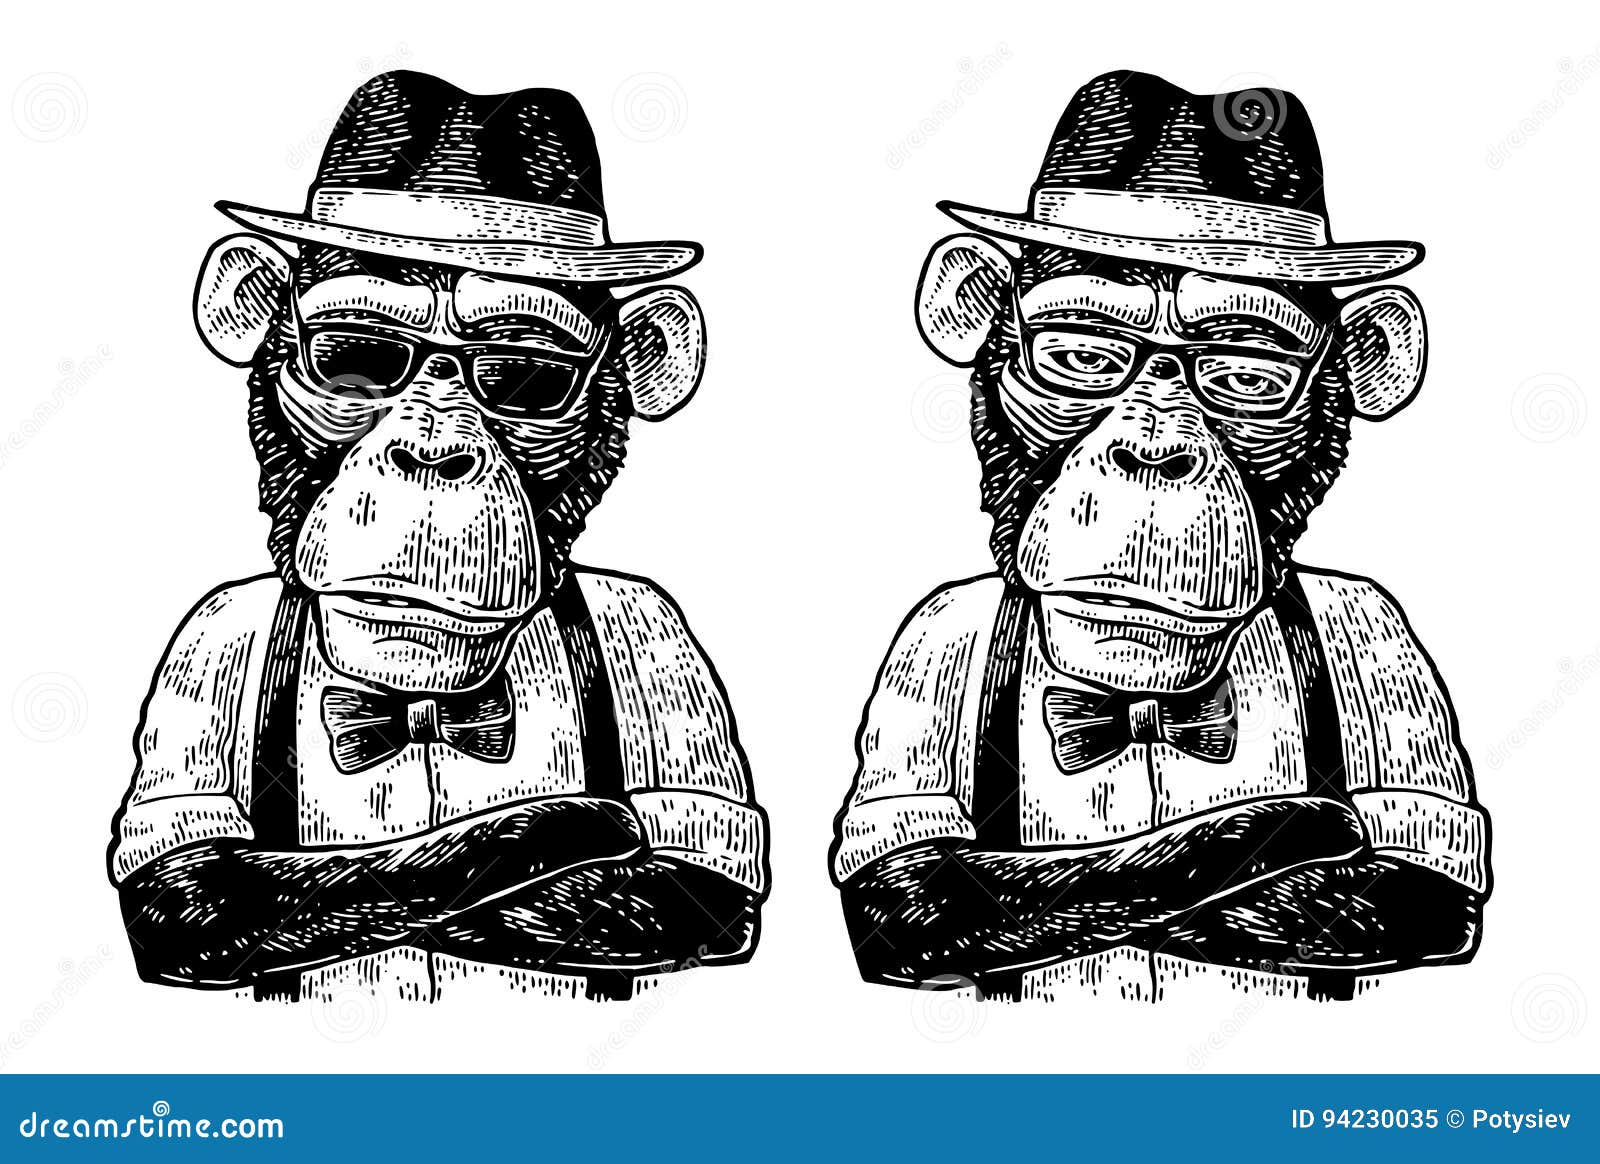 monkey hipster with arms crossedin in hat, shirt, glasses and bow tie